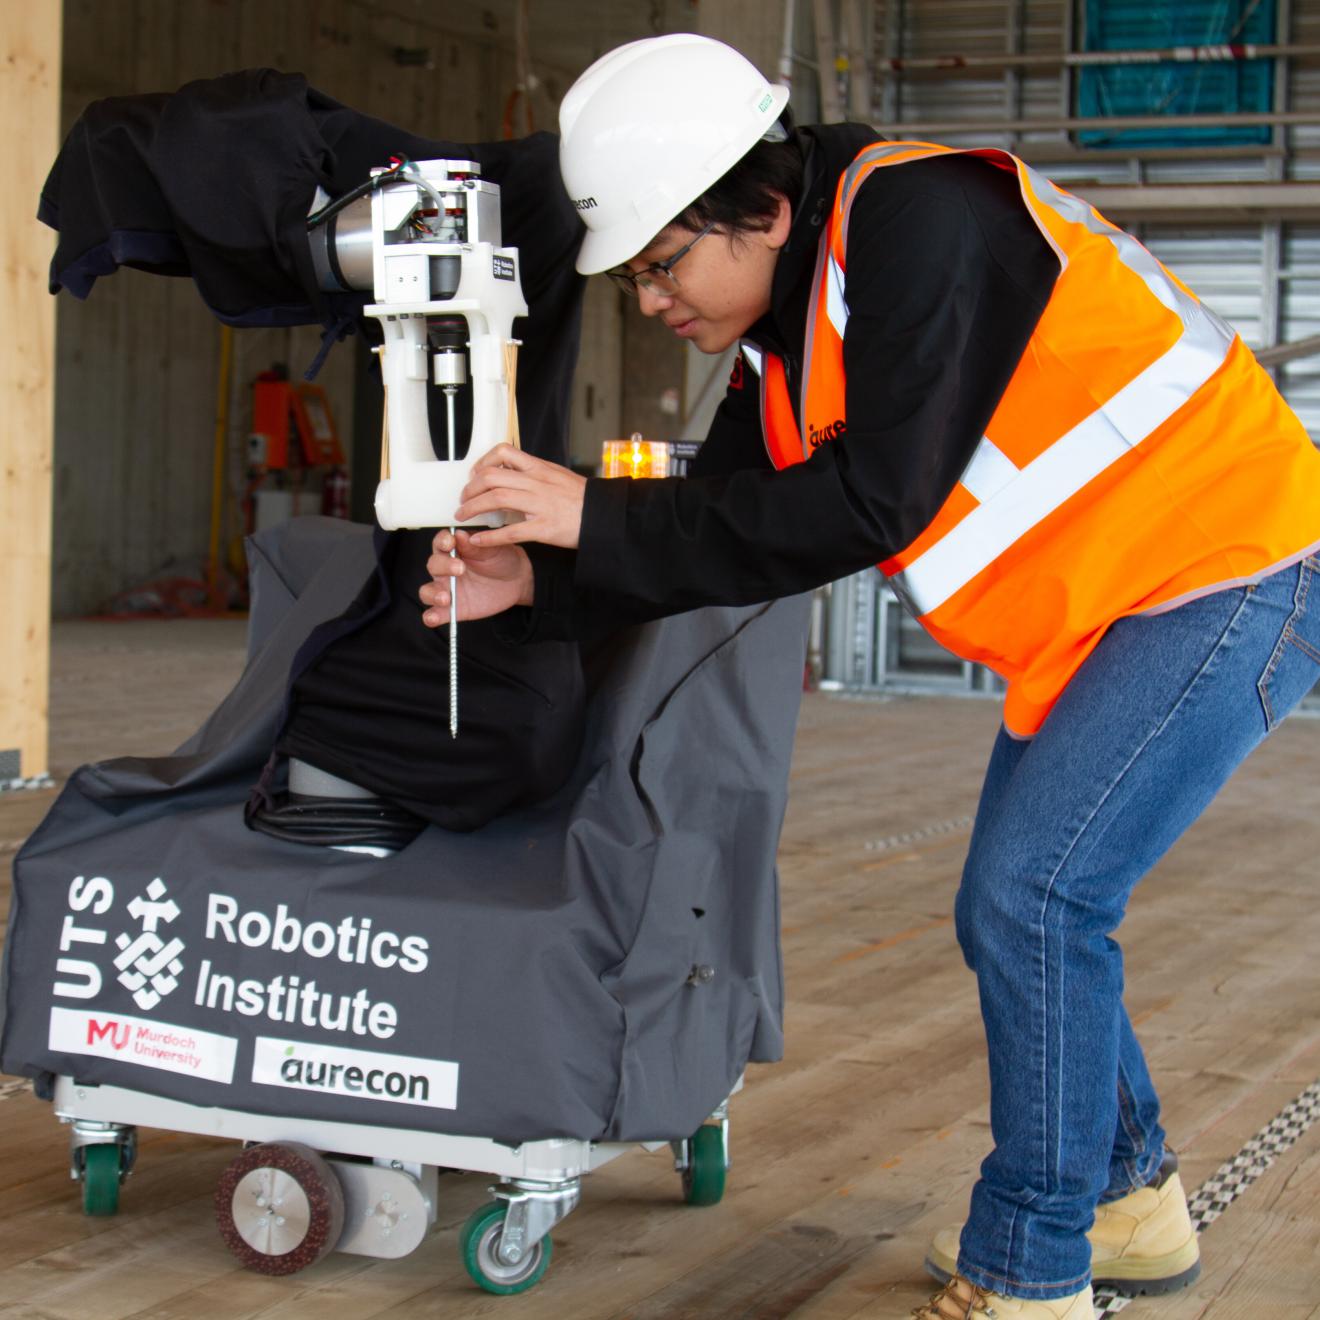 UTS researcher fits a screw into a robot on a Perth construction site.